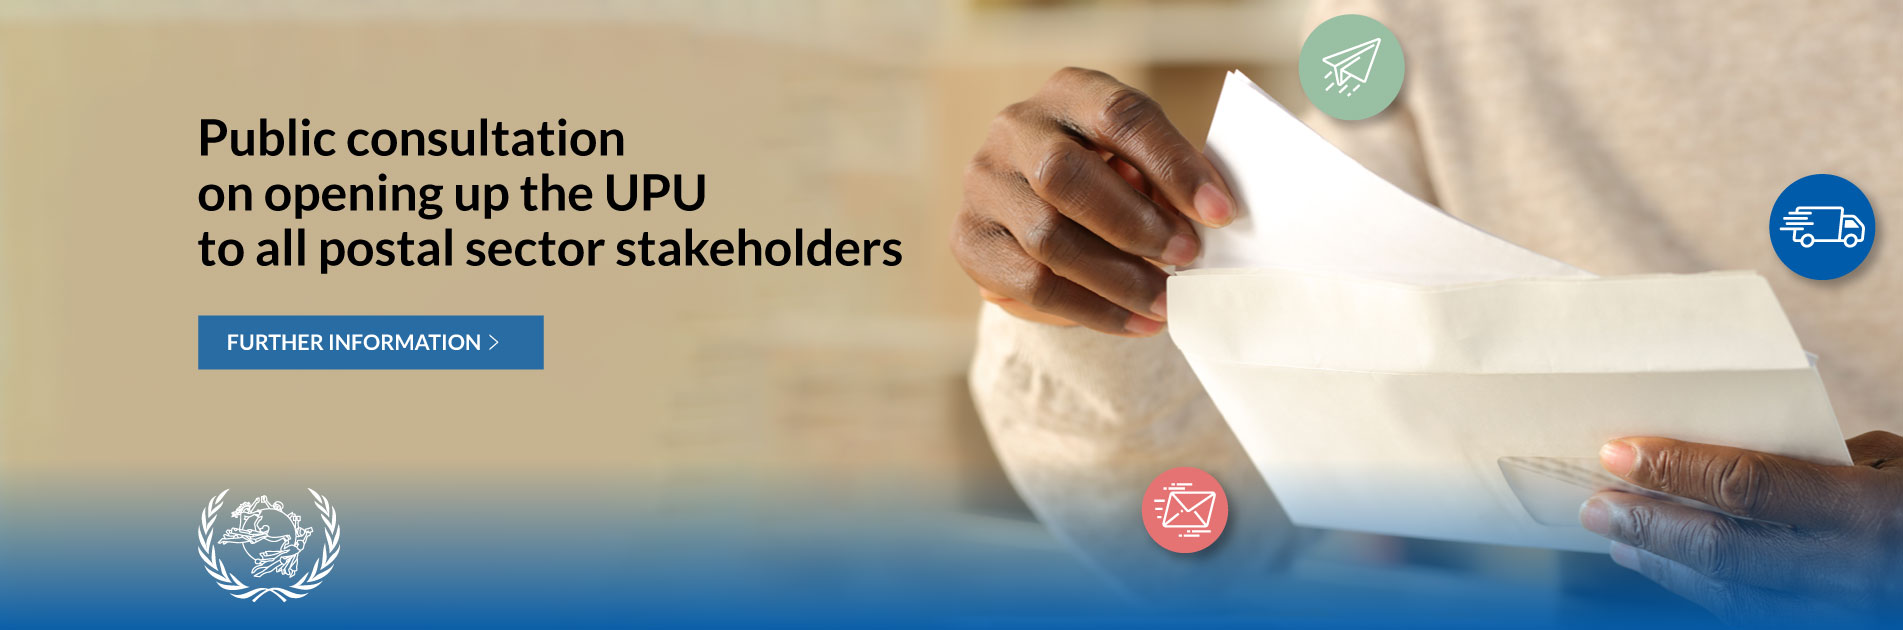 Public consultation on opening up the UPU to all postal sector stakeholders